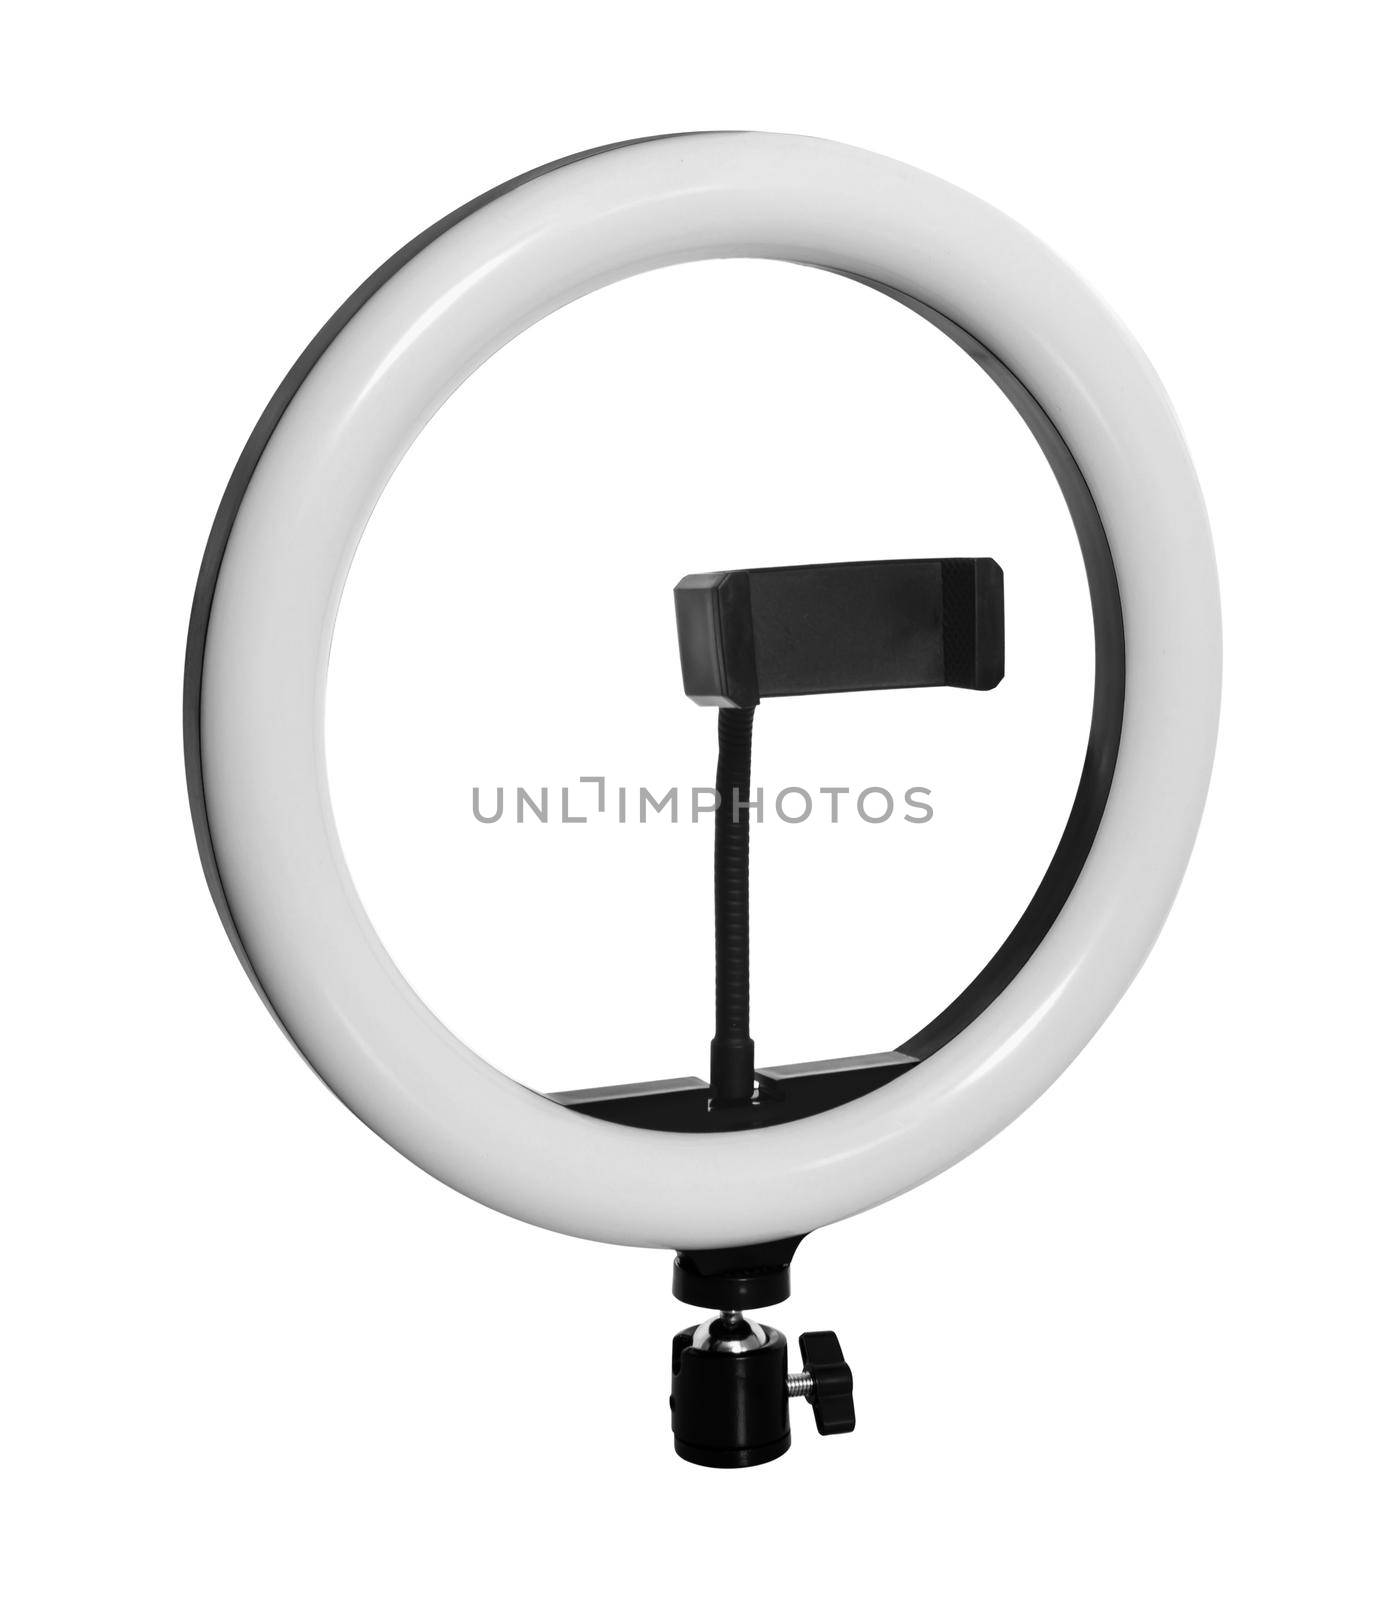 Selfie lamp with phone mount isolated on white background